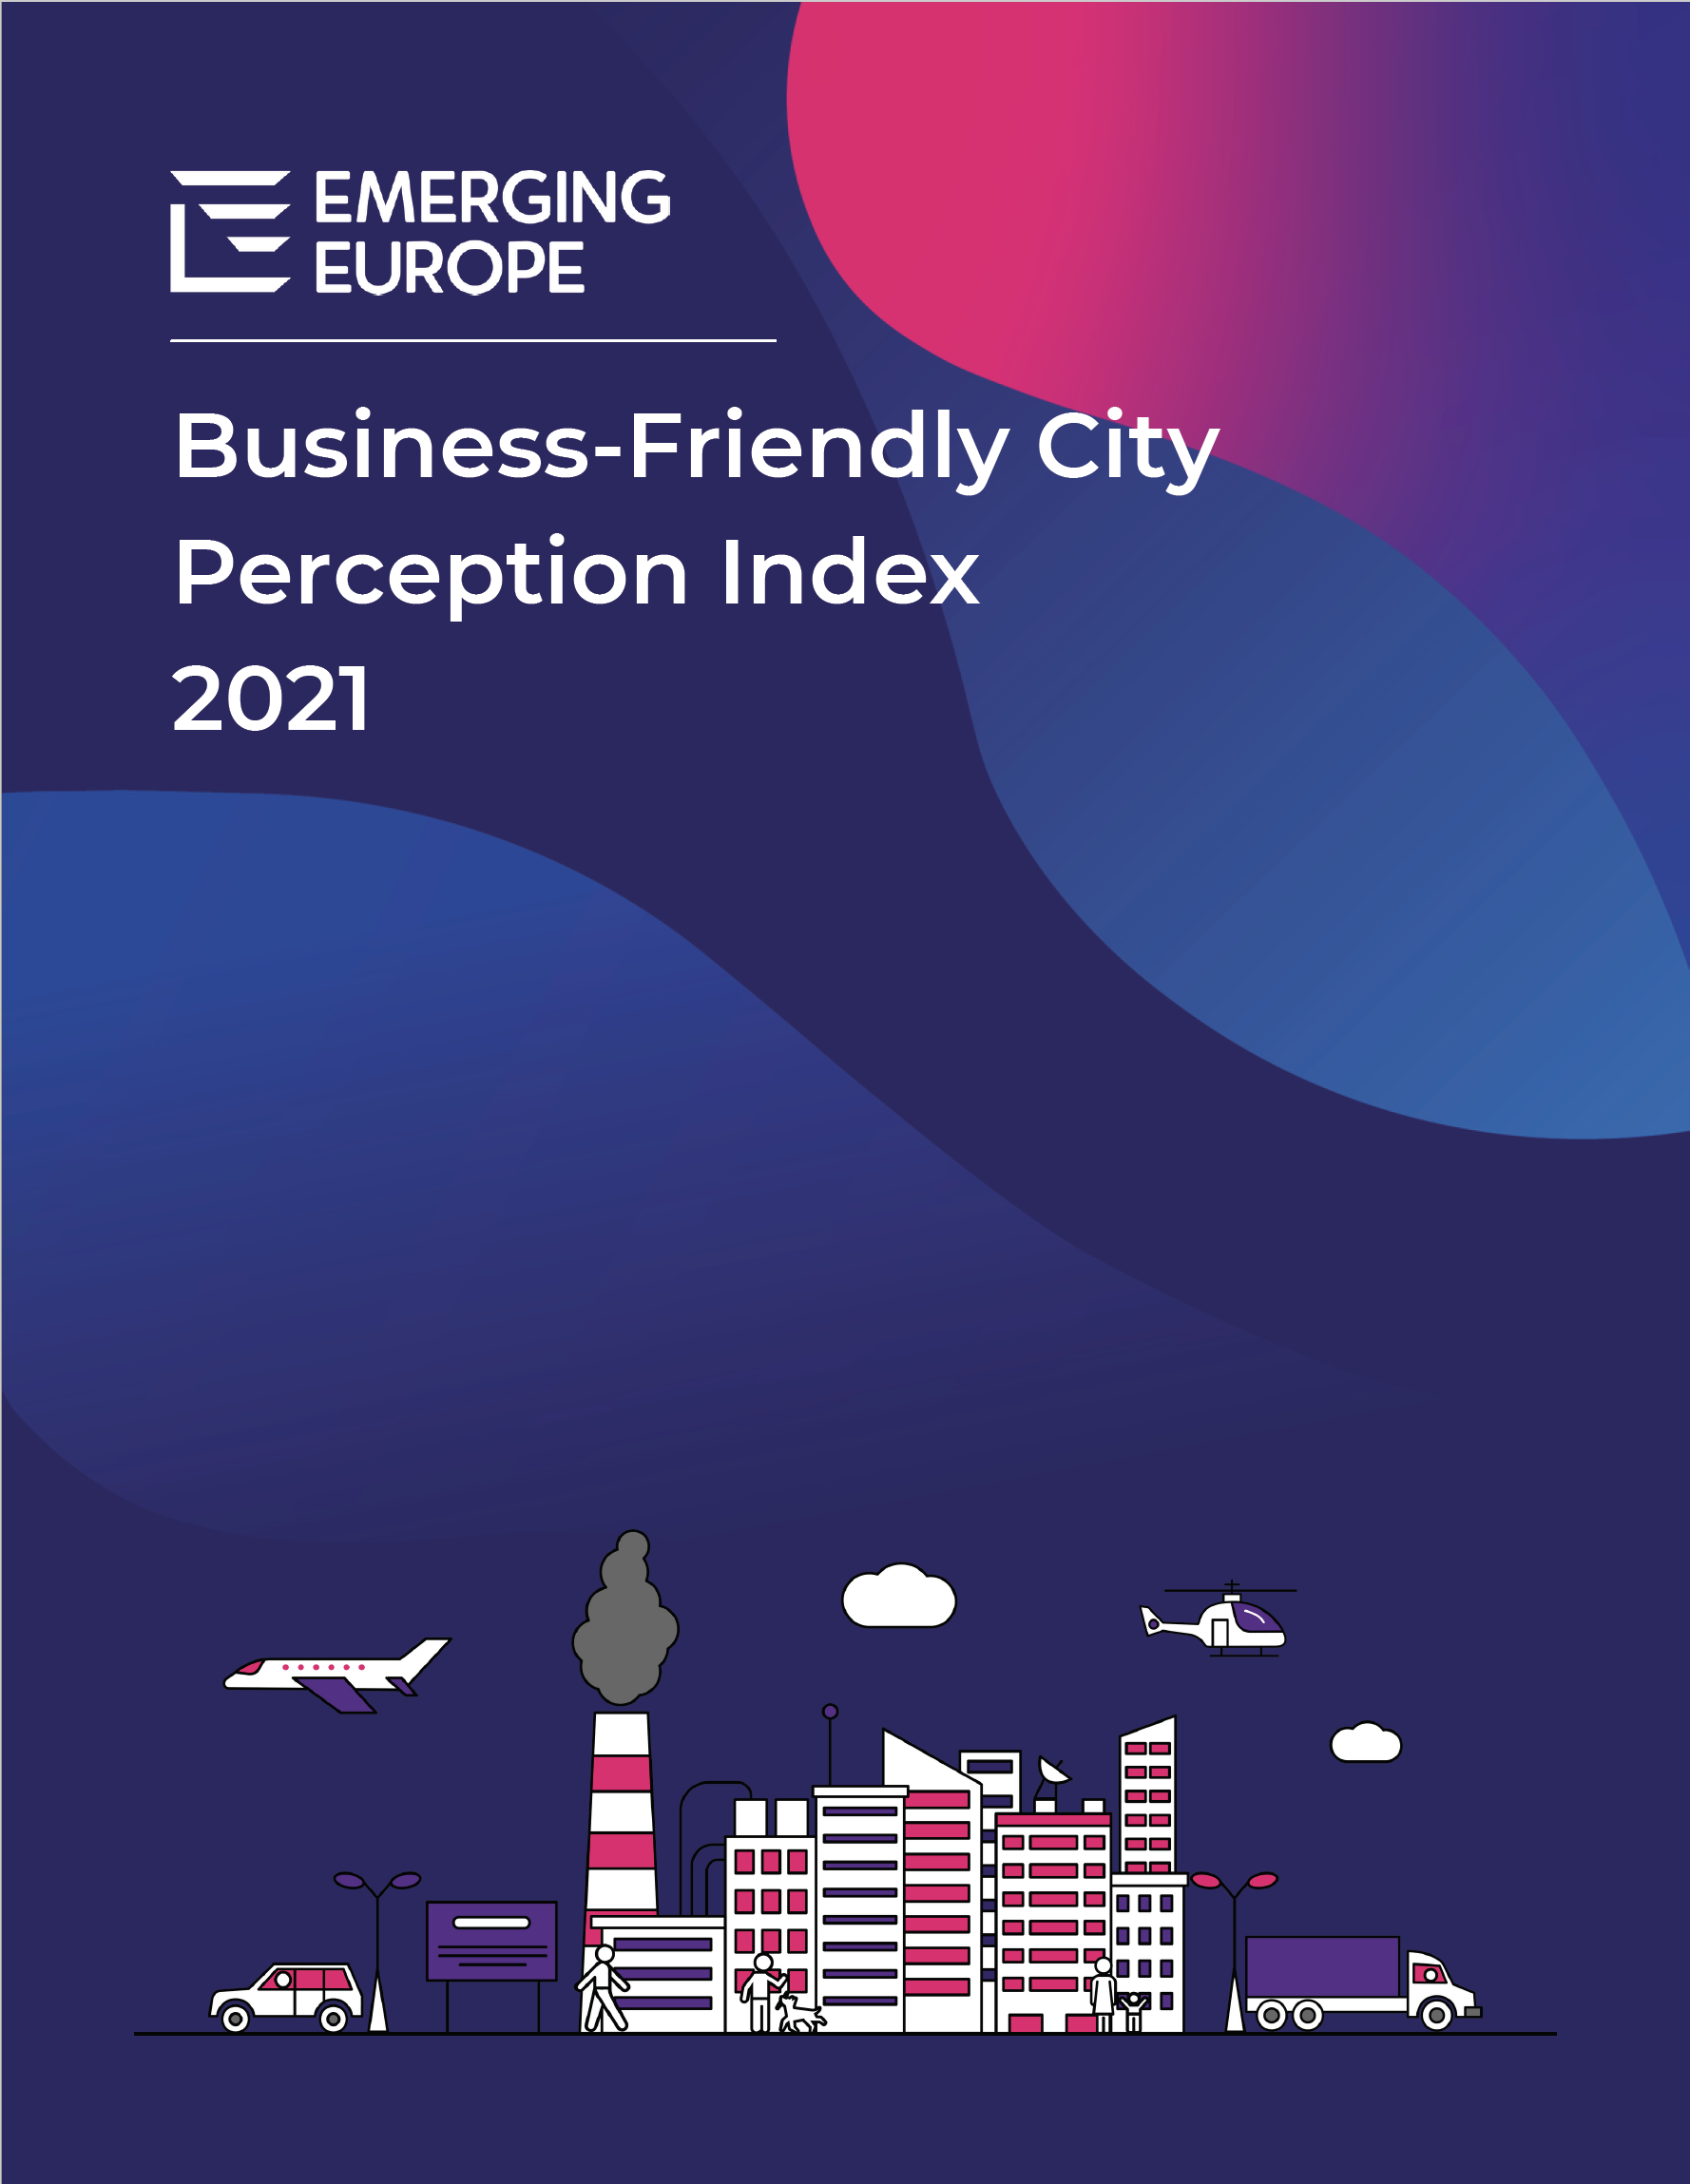 Business-Friendly City Perception Index 2021